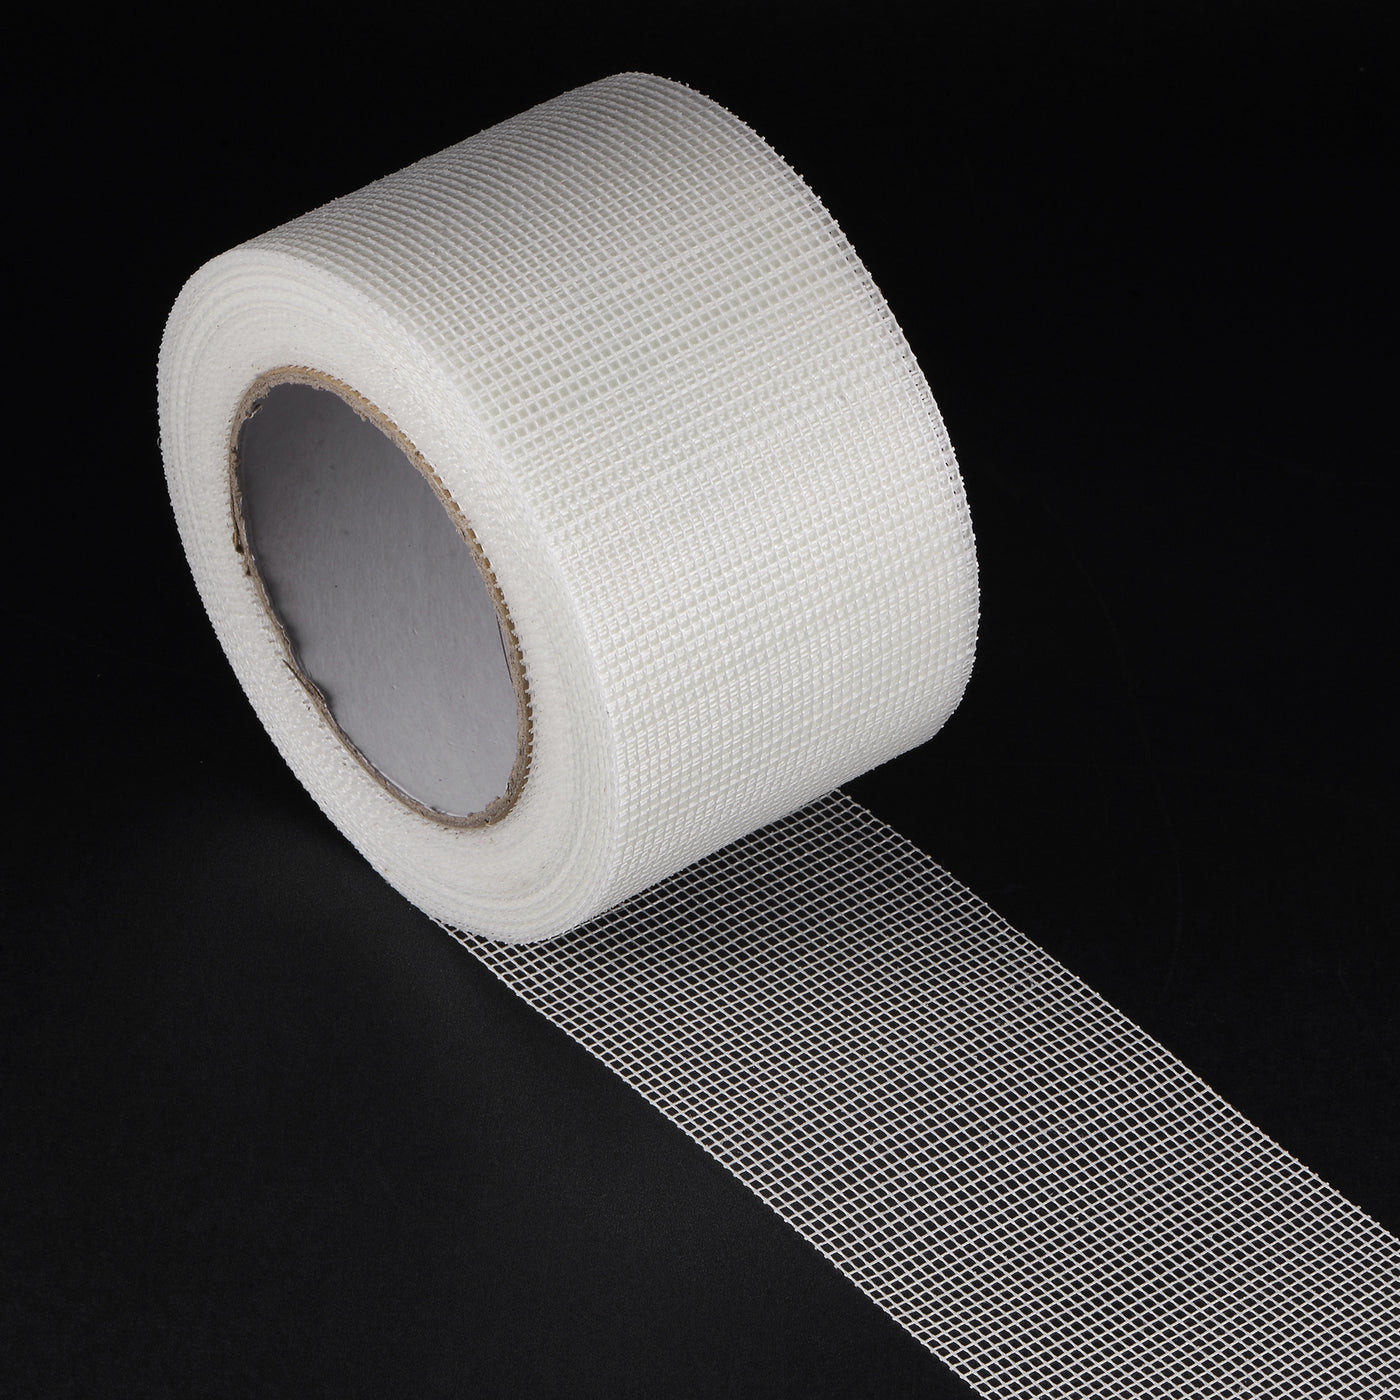 uxcell Uxcell Drywall Joint Tape Self-Adhesive Fiberglass Repair Wall Patch